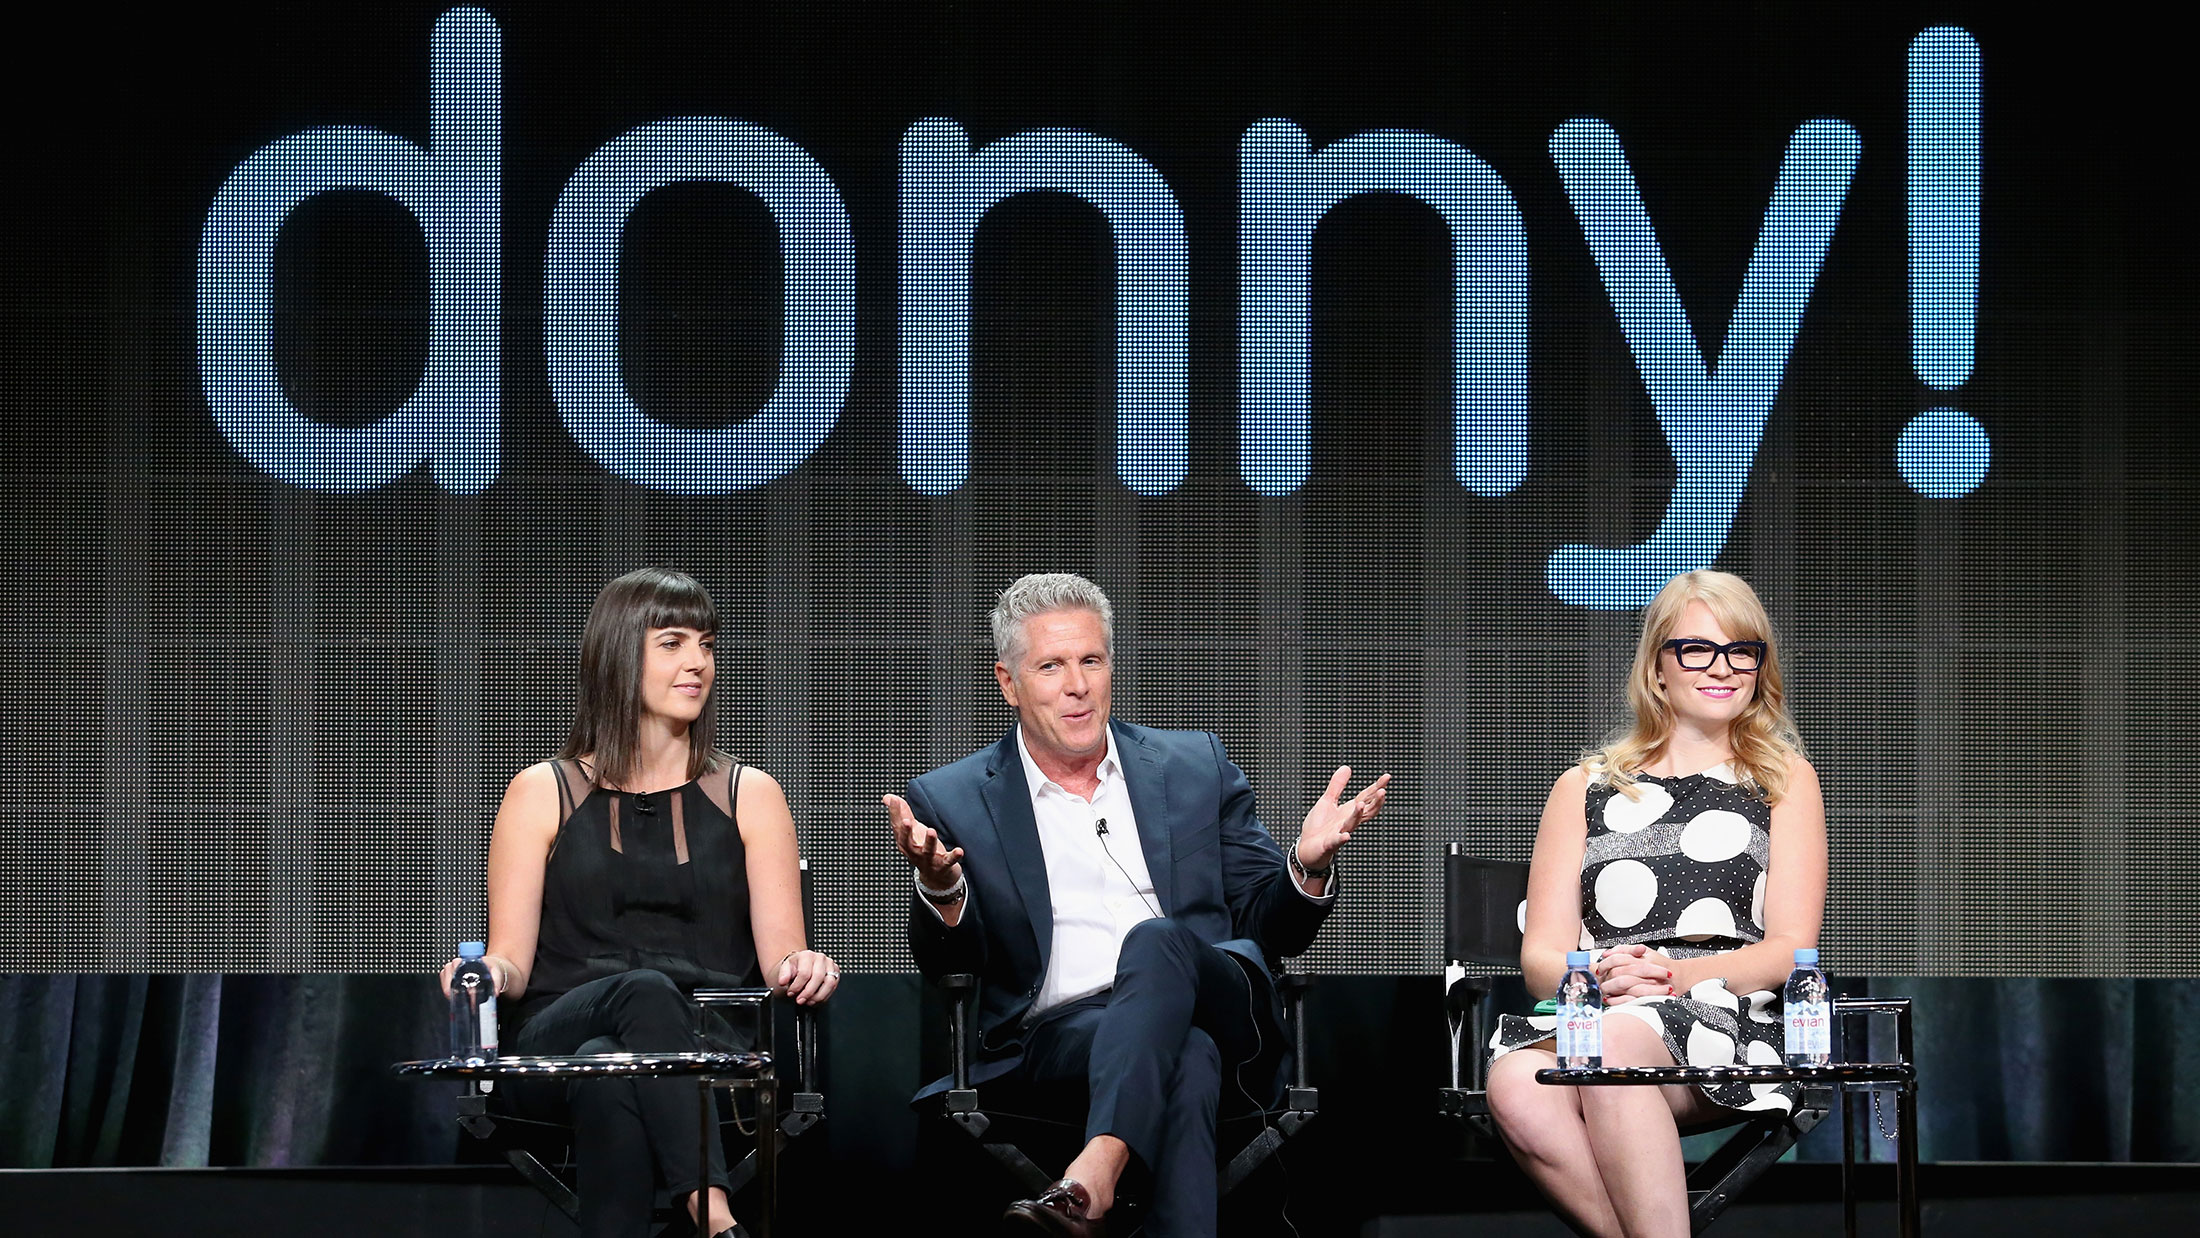 Executive producer Angie Day, TV personalities Donny Deutsch and Emily Tarver during the USA Networks 'donny!' panel discussion at the NBCUniversal portion of the 2015 Summer TCA Tour at The Beverly Hilton Hotel on August 12, 2015.
